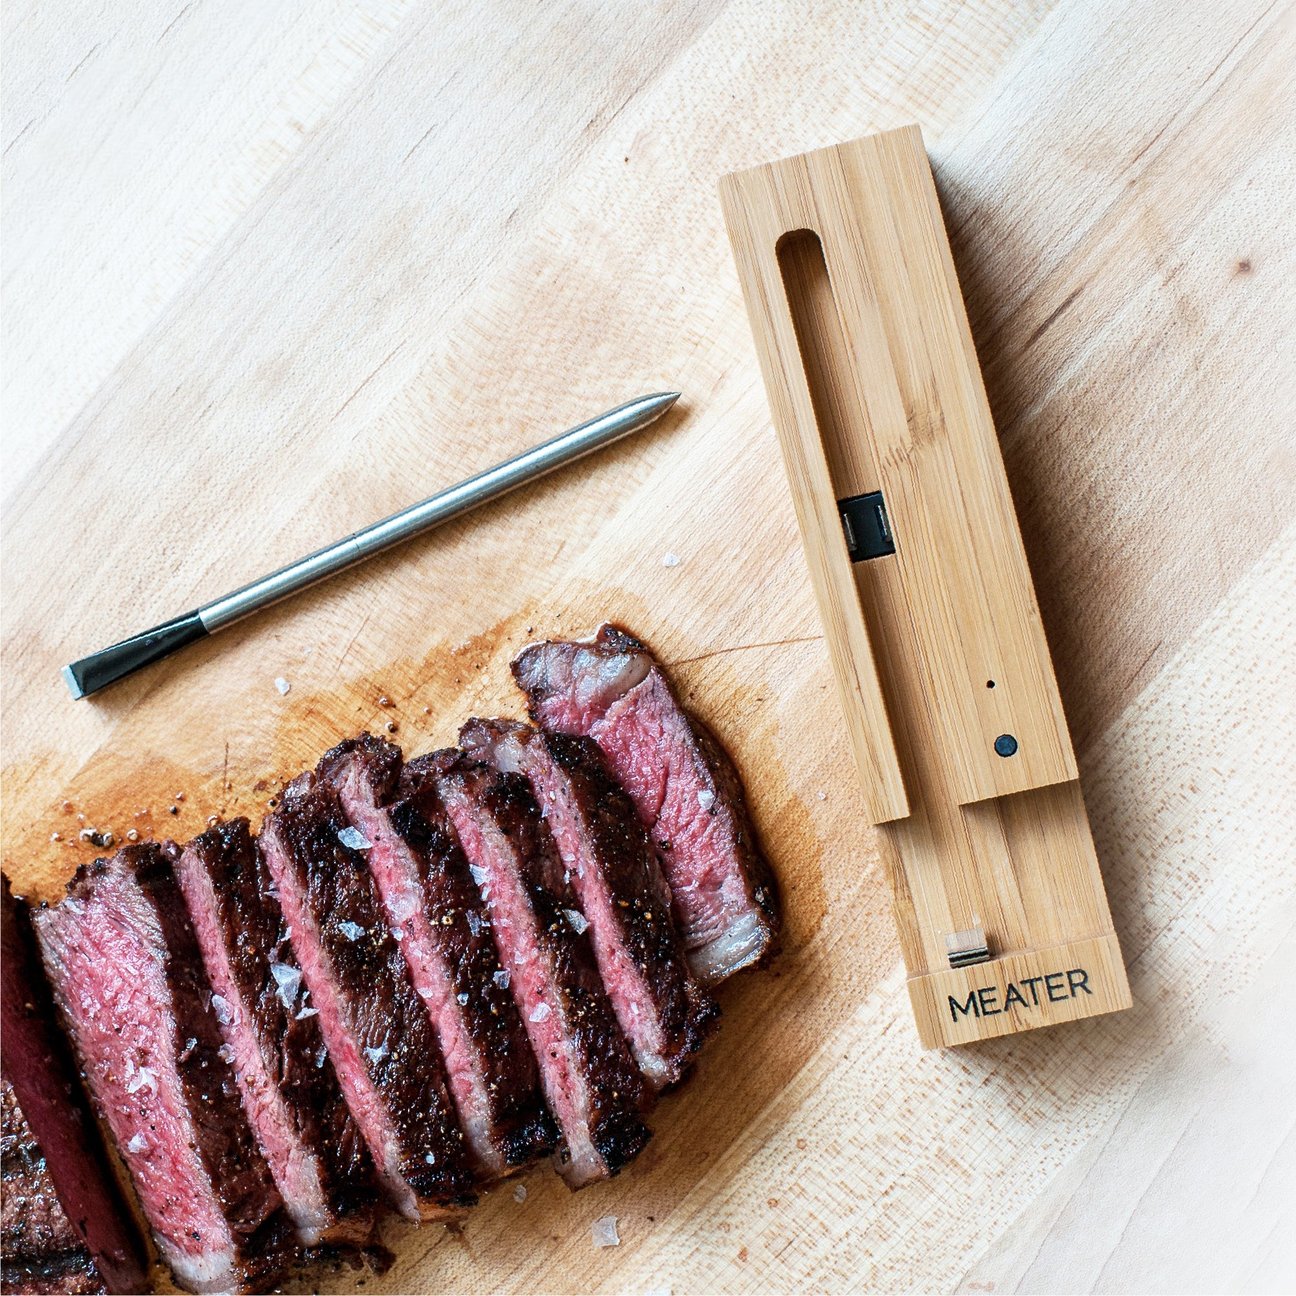 MEATER Truly Wireless Meat Probe Review 